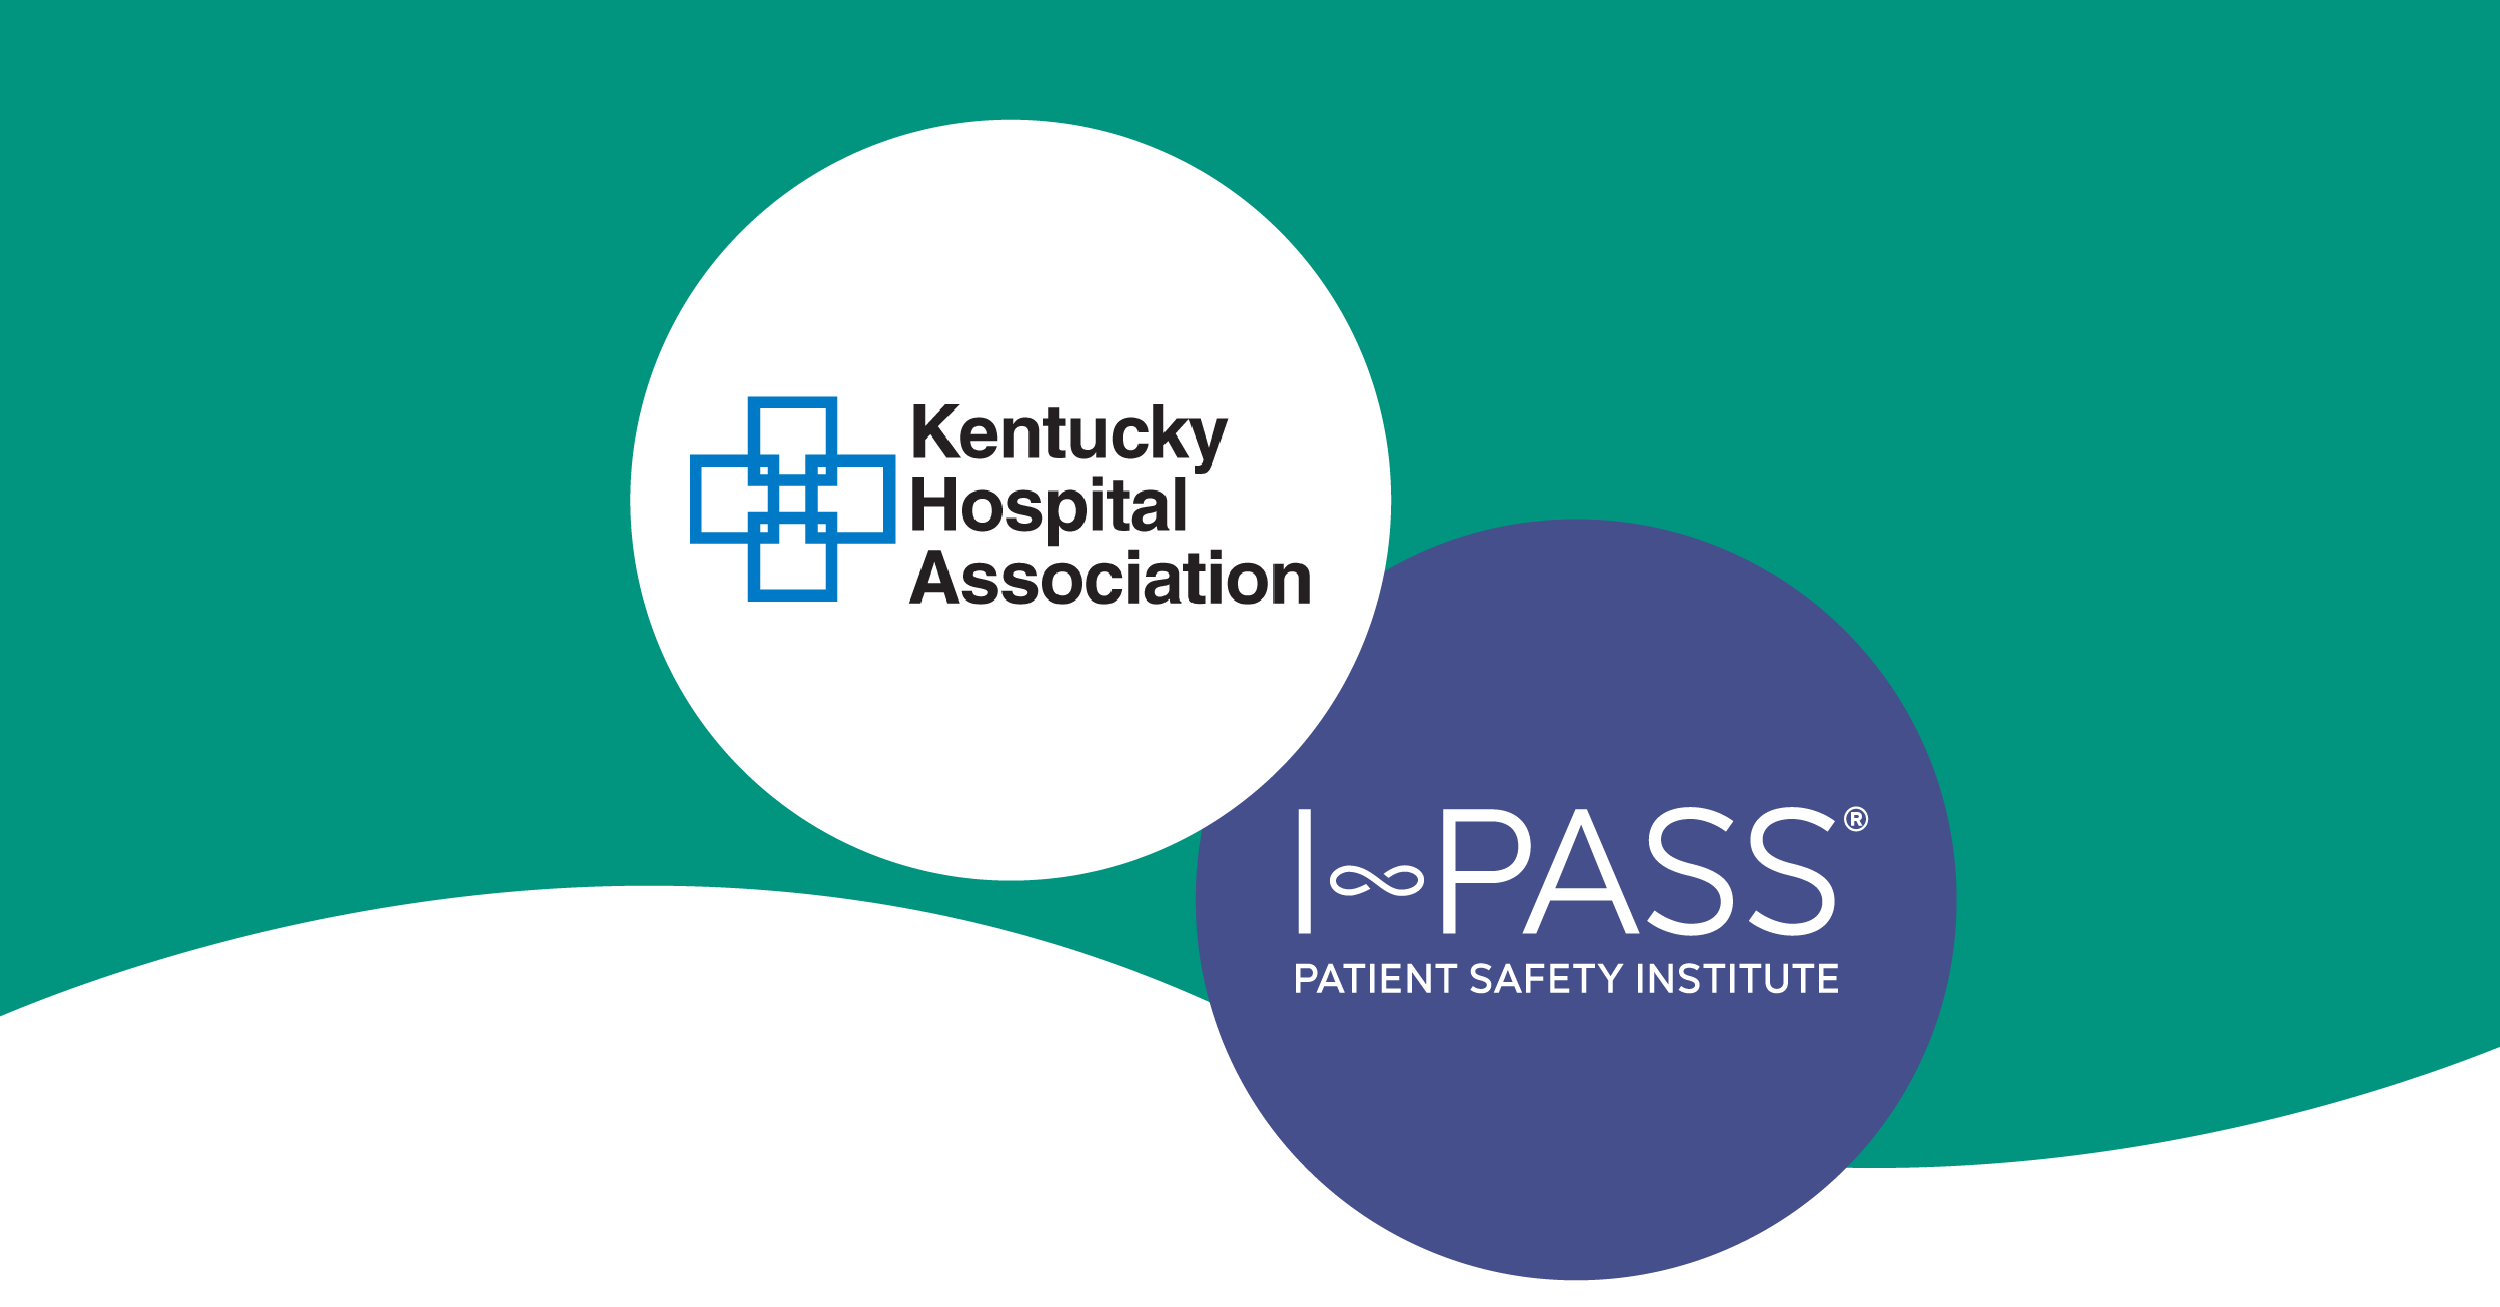 Kentucky Hospital Association Partners with I-PASS to Launch Statewide Program to Reduce Medical Errors, Improve Patient Safety